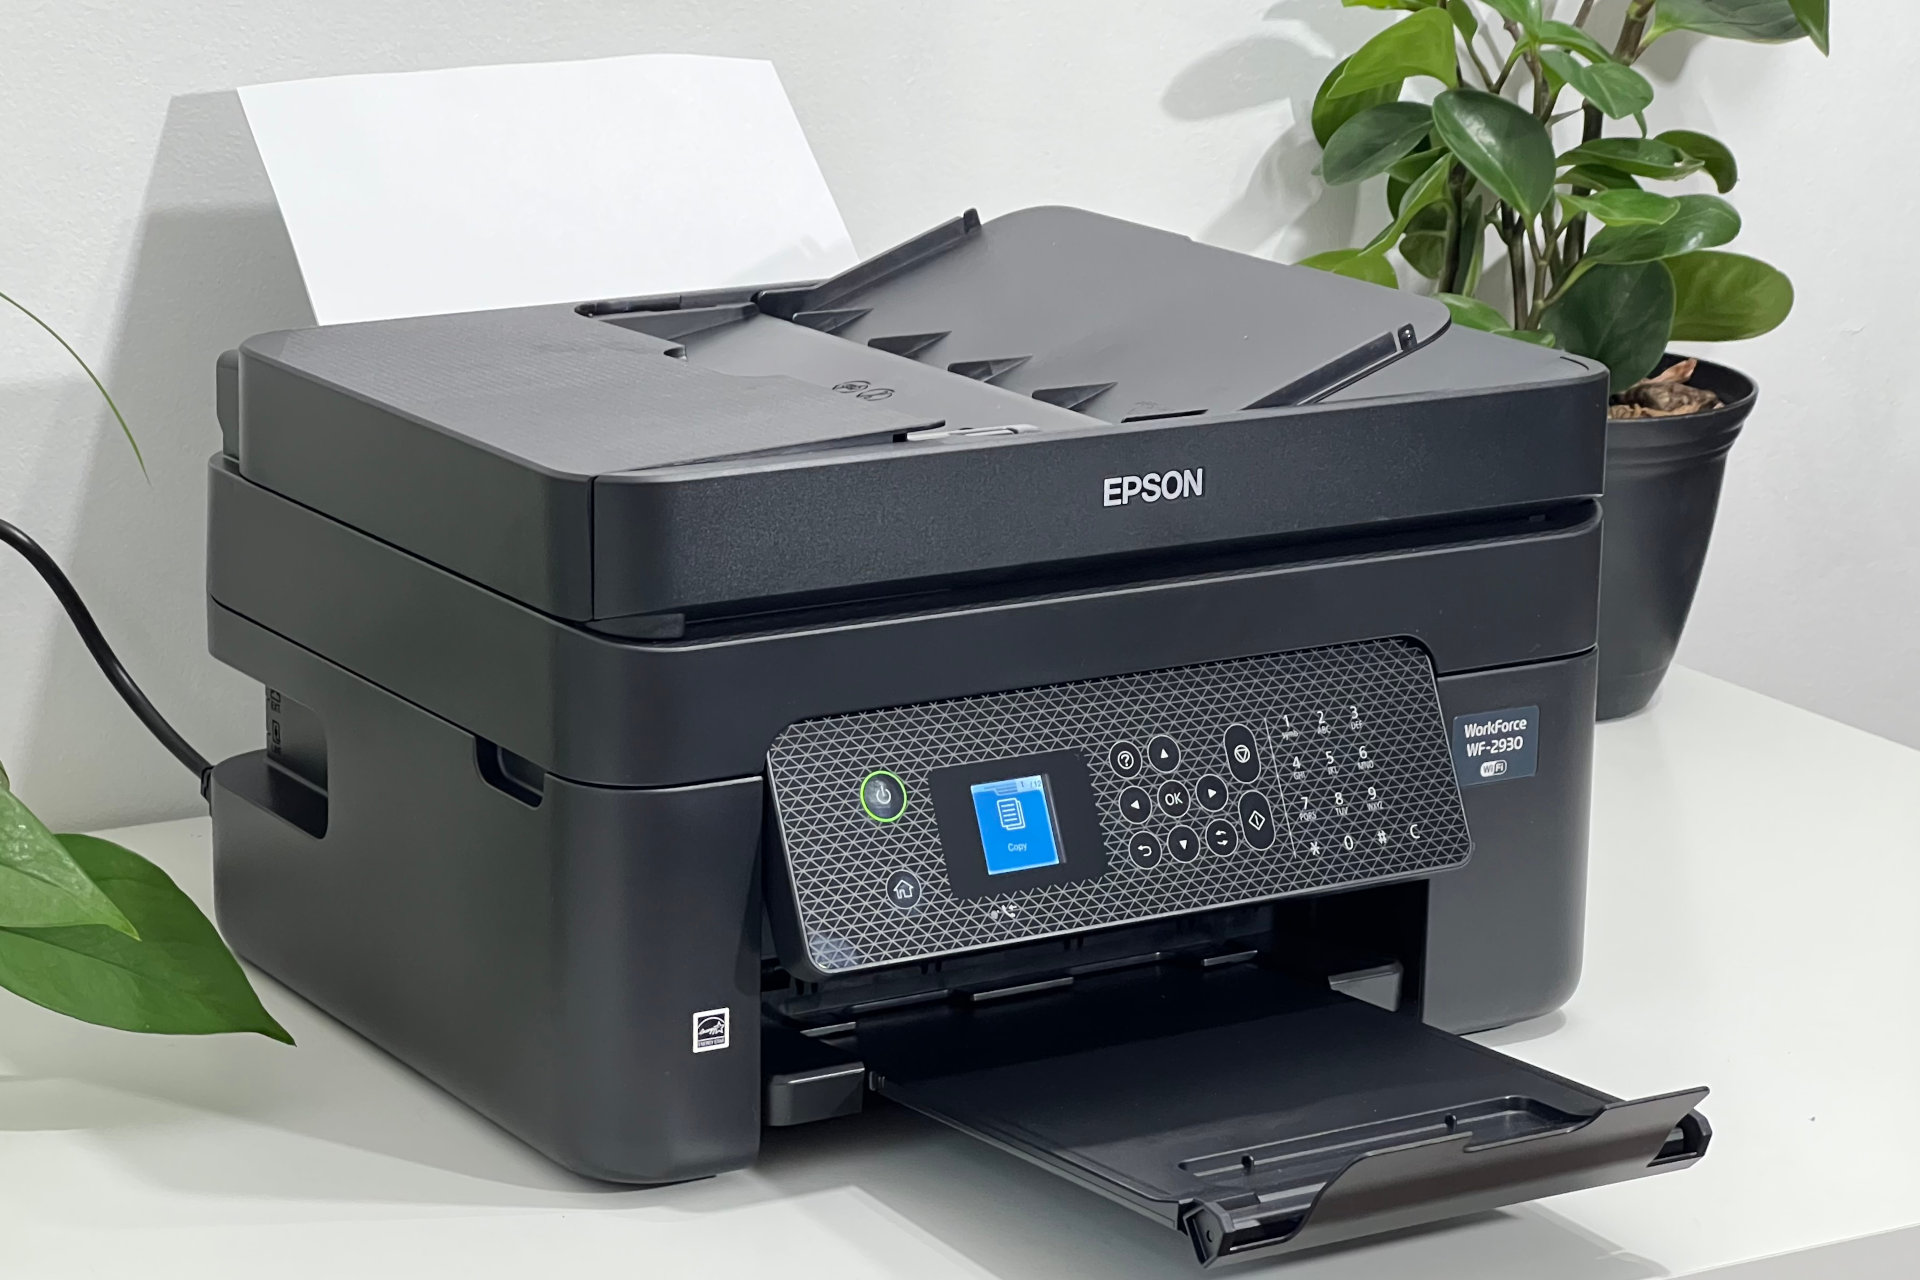 Epson WorkForce WF-2930 is a compact and affordable multifunction printer.